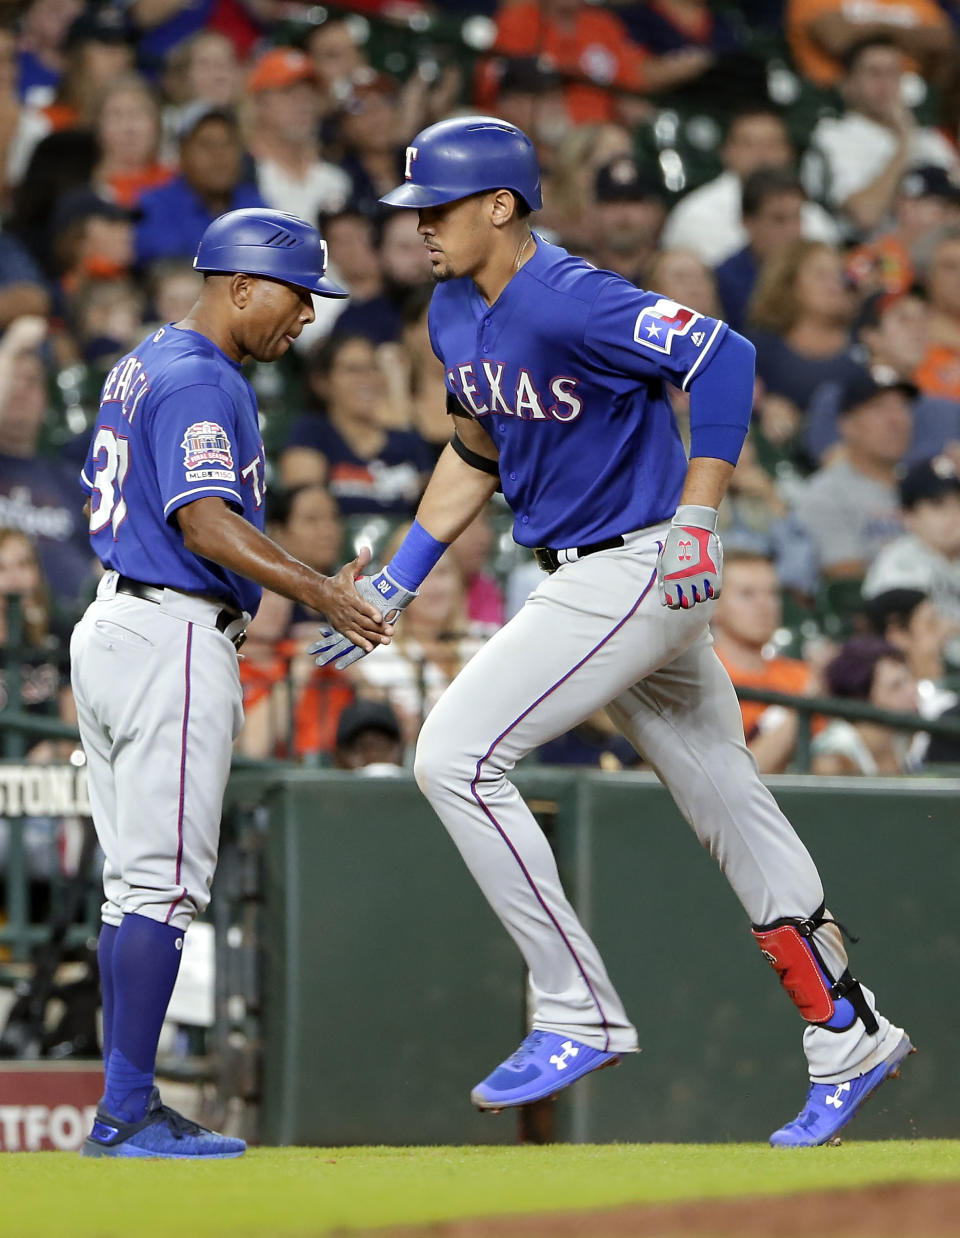 Texas Rangers third base coach Tony Beasley, left, congratulates Ronald Guzman, right, as he rounds third base on his home run during the eighth inning of a baseball game against the Houston Astros on Wednesday, Sept. 18, 2019, in Houston. (AP Photo/Michael Wyke)